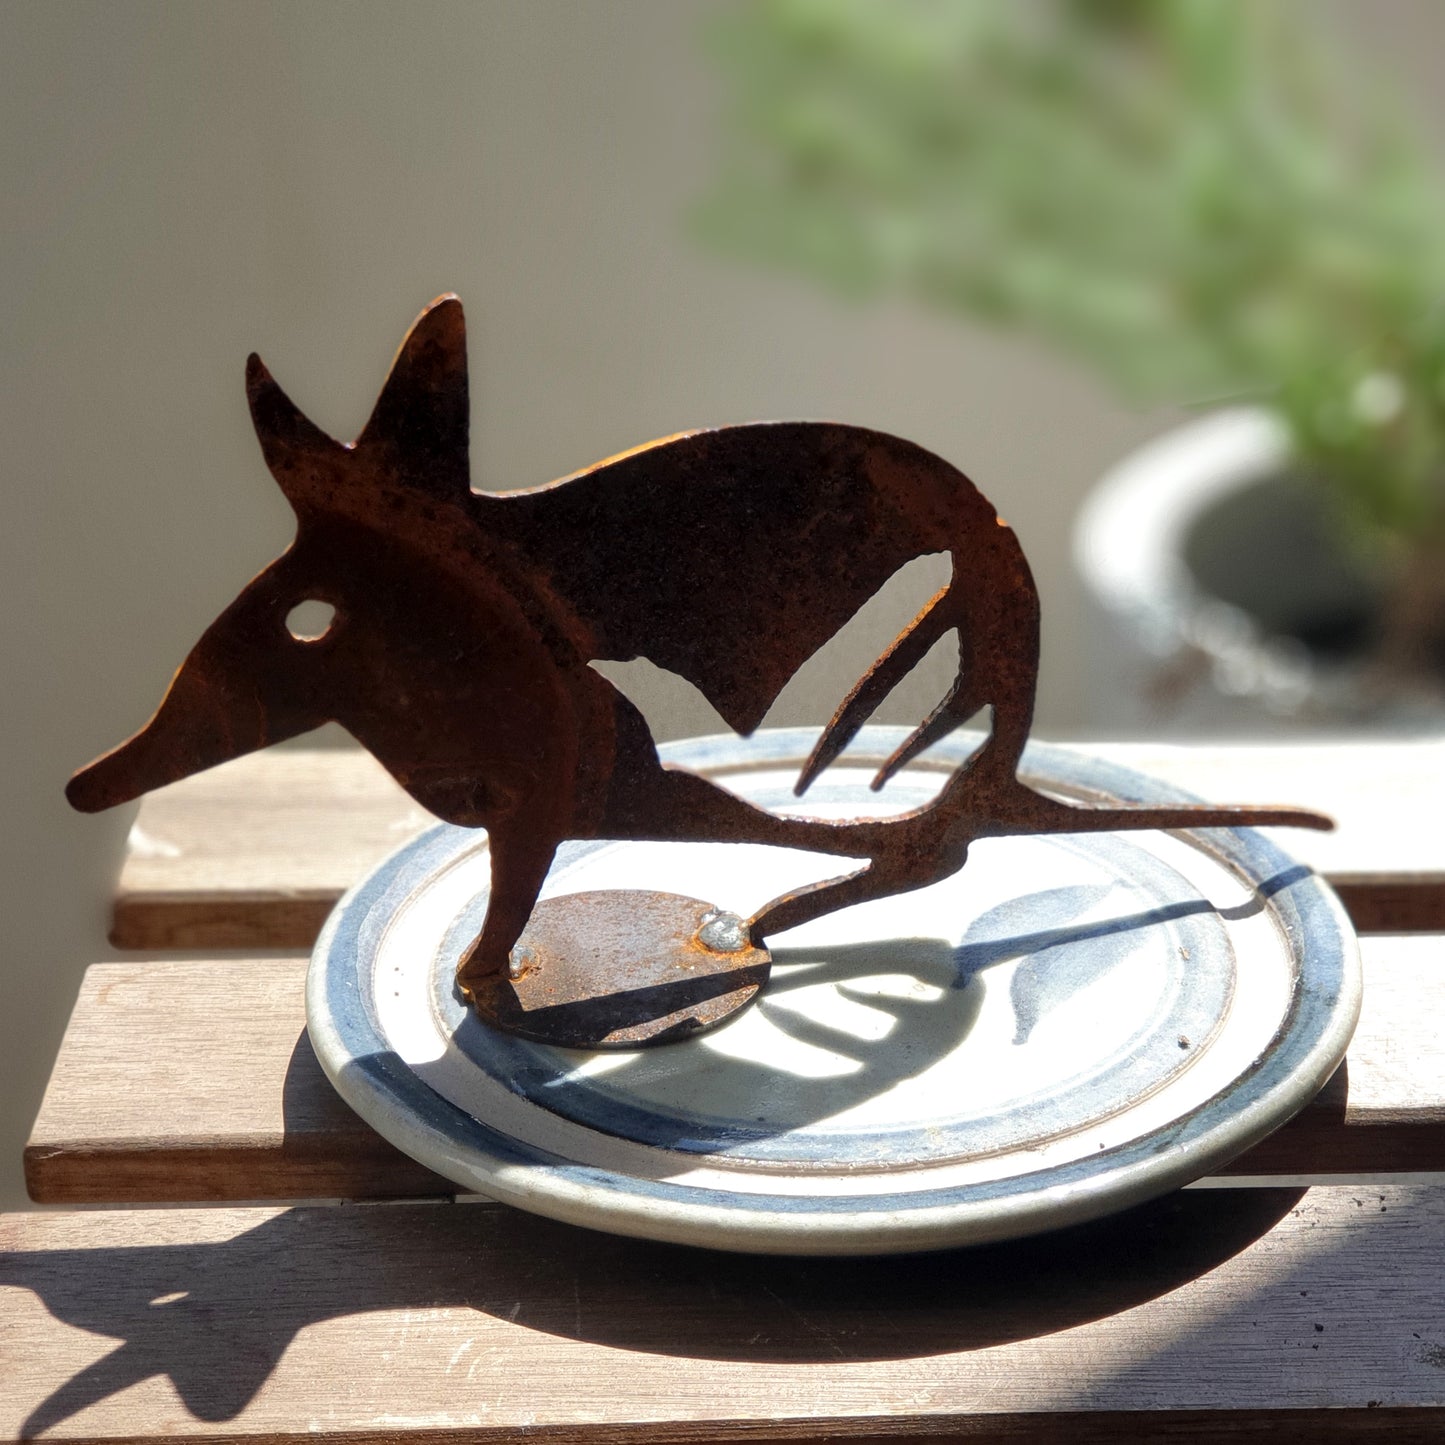 Bandicoot by Ninapatina made from weathering steel